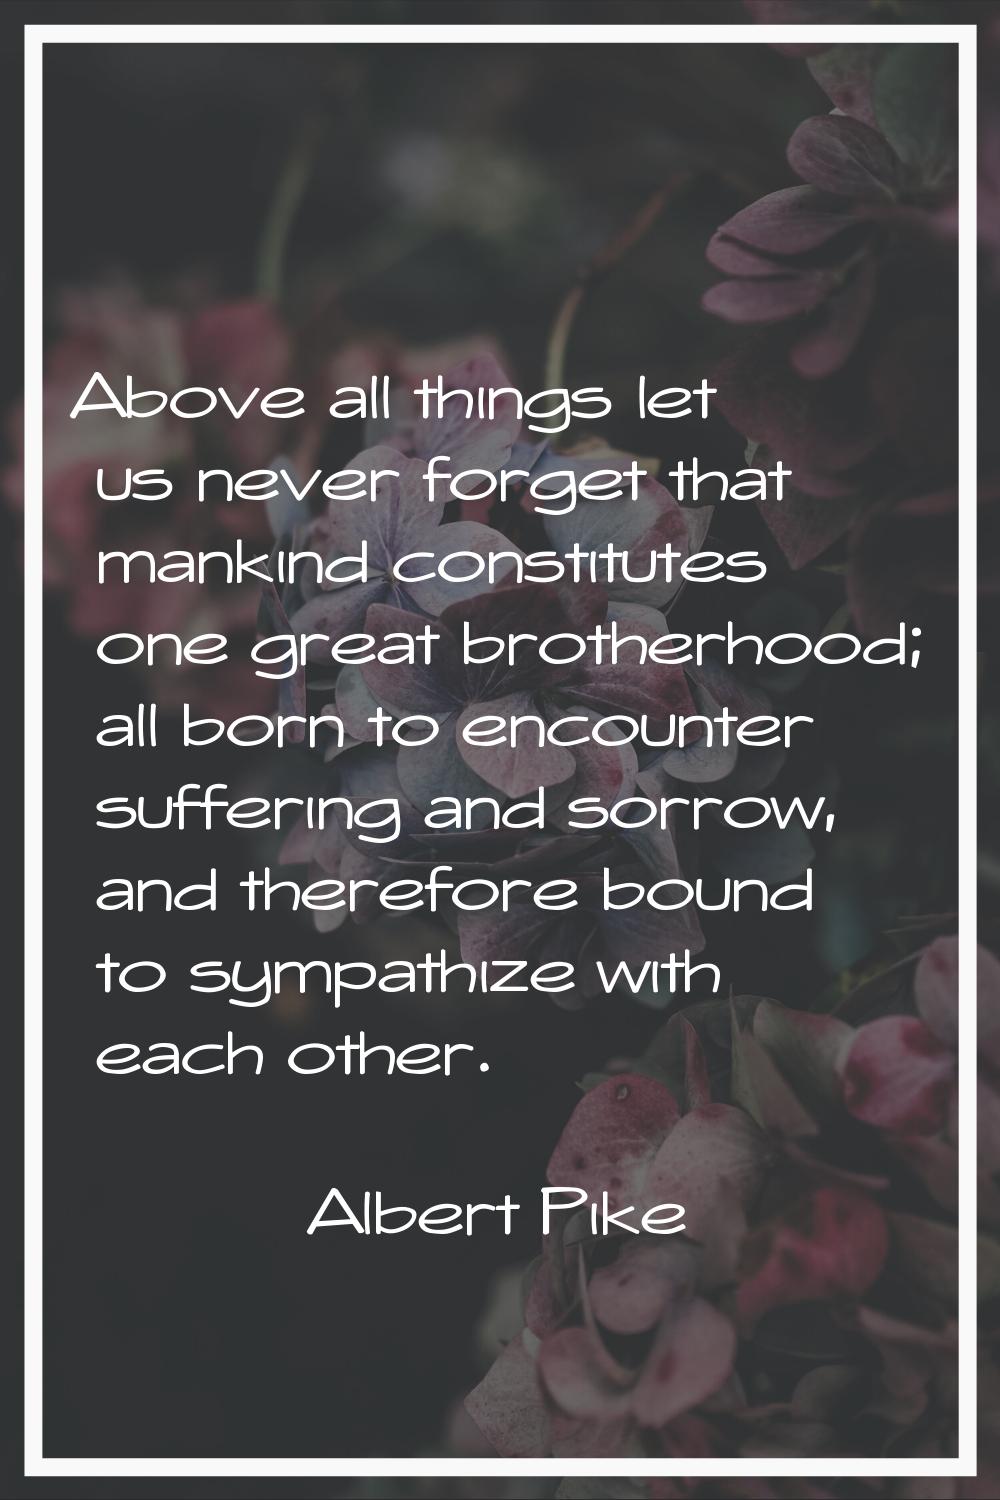 Above all things let us never forget that mankind constitutes one great brotherhood; all born to en